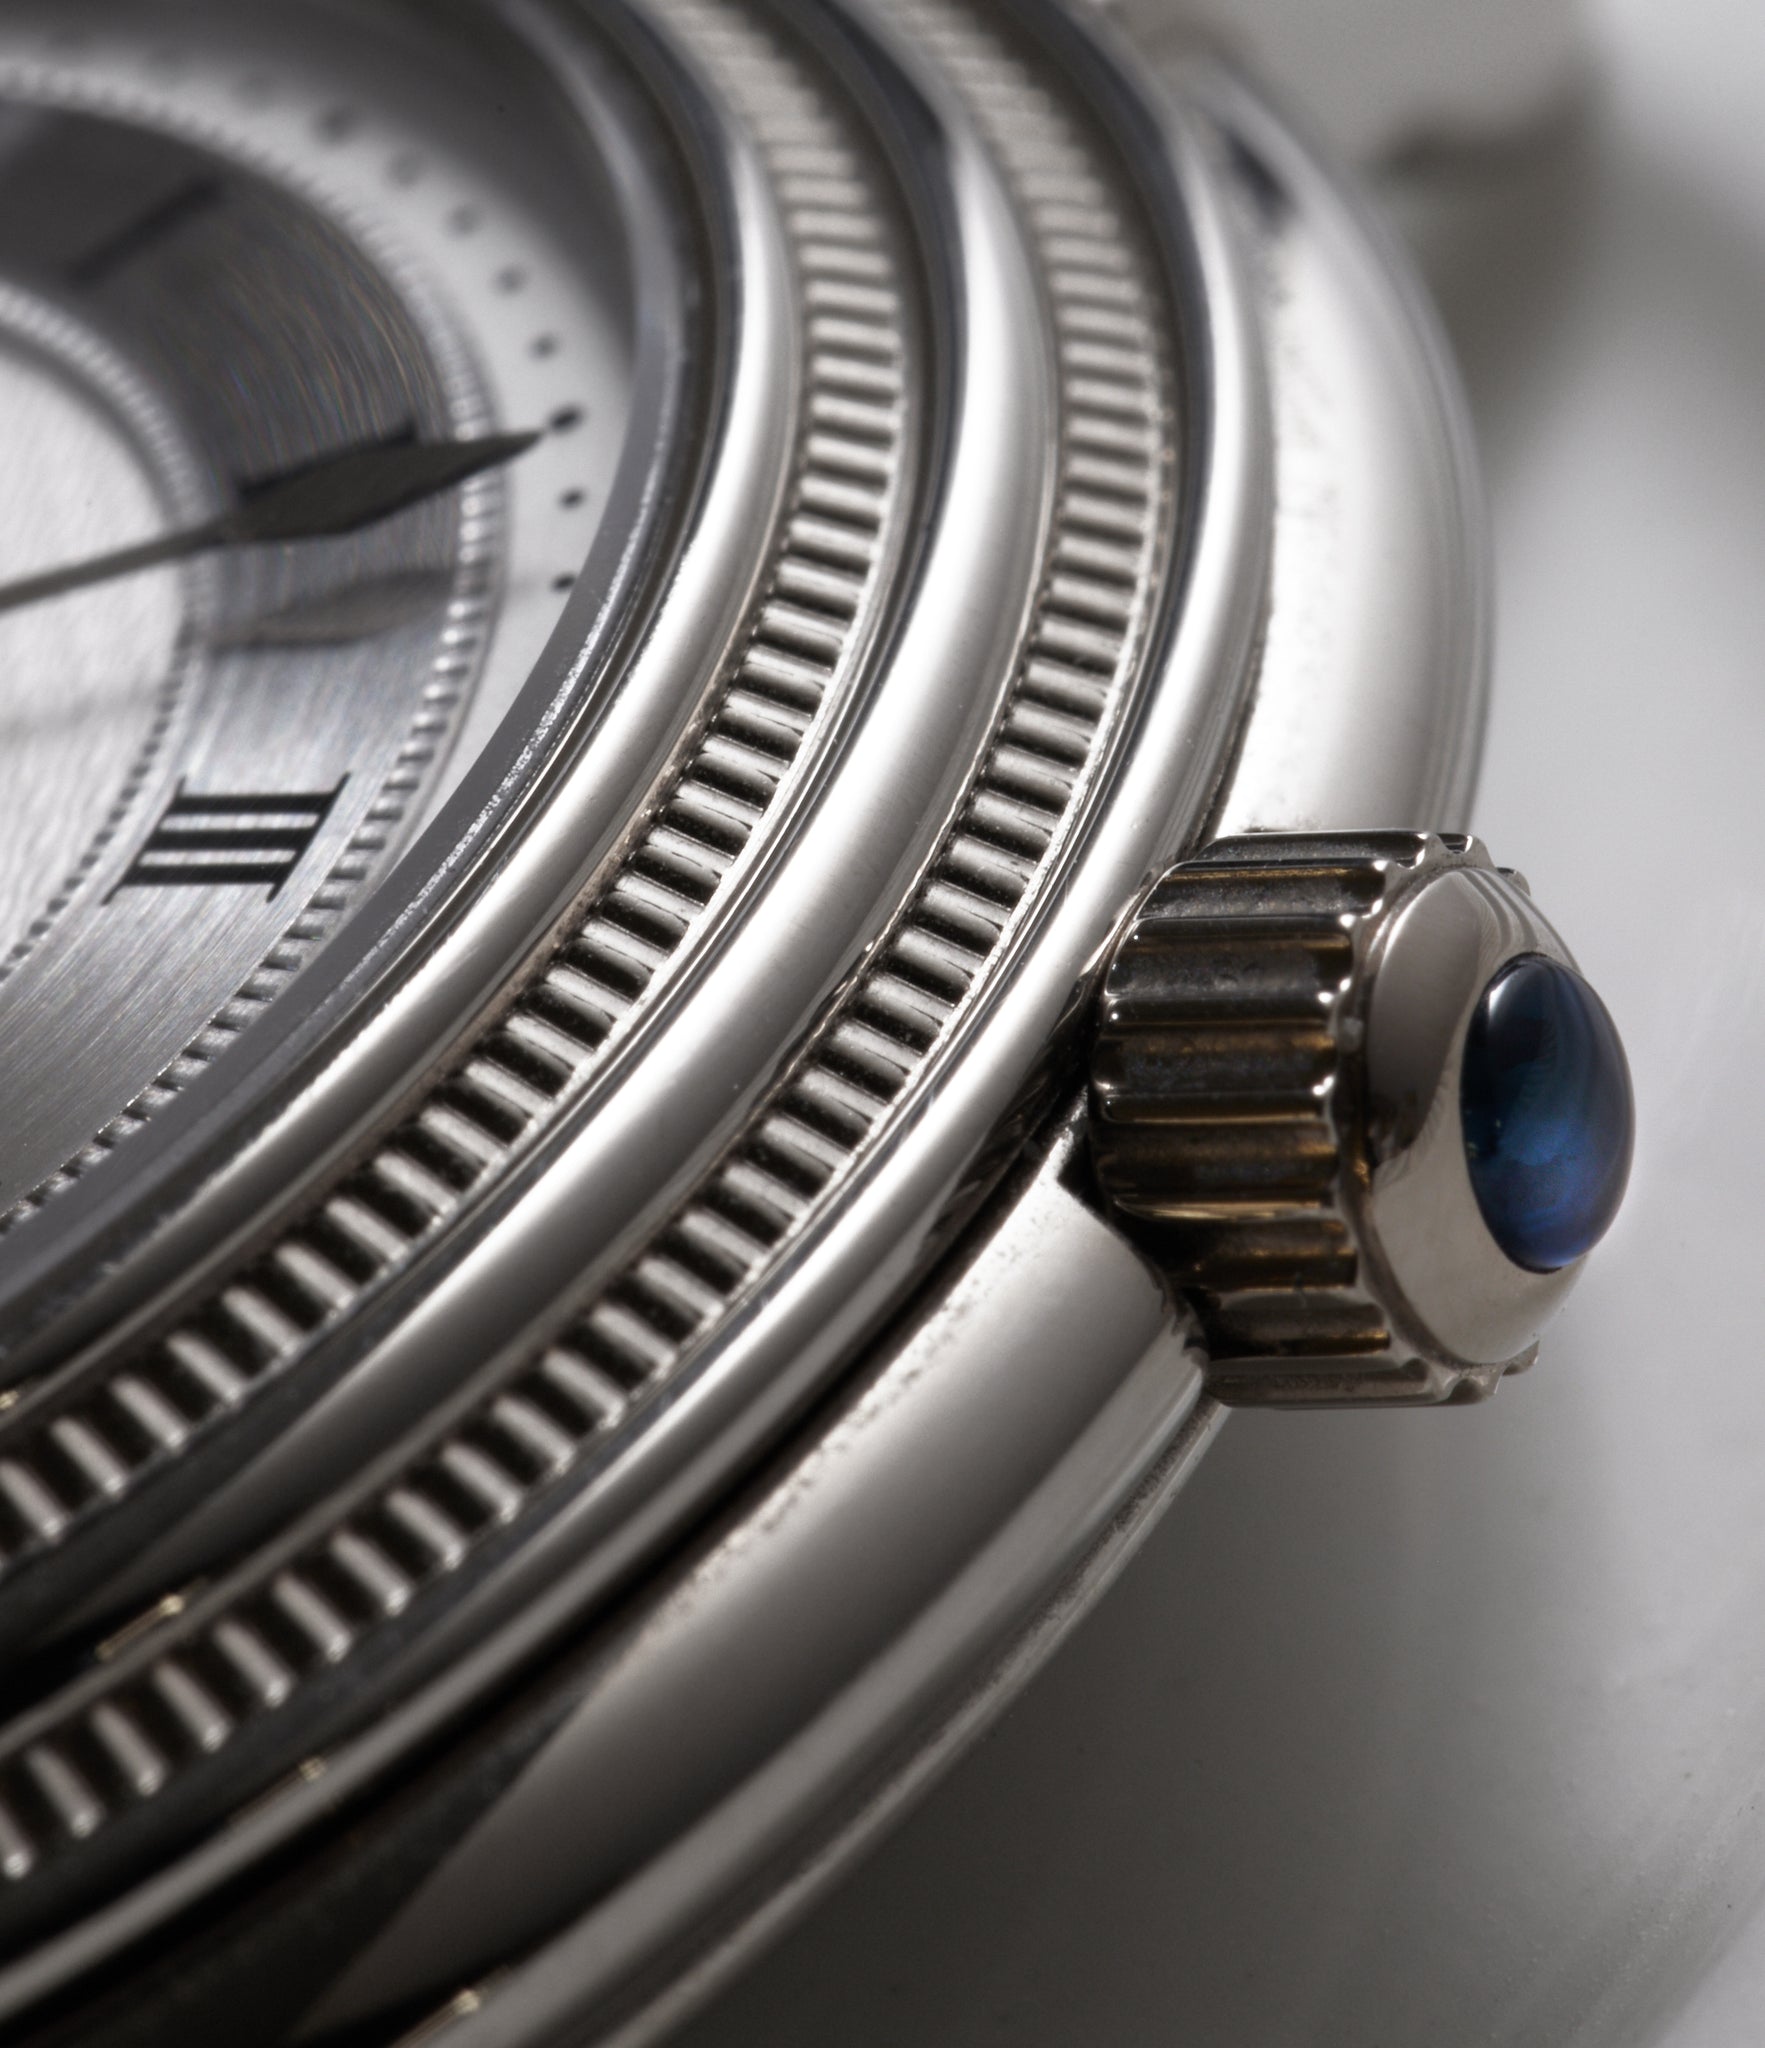 Up close with the details of the unusual double-stepped bezel found on the Memory Time, the first watch created by the brand.